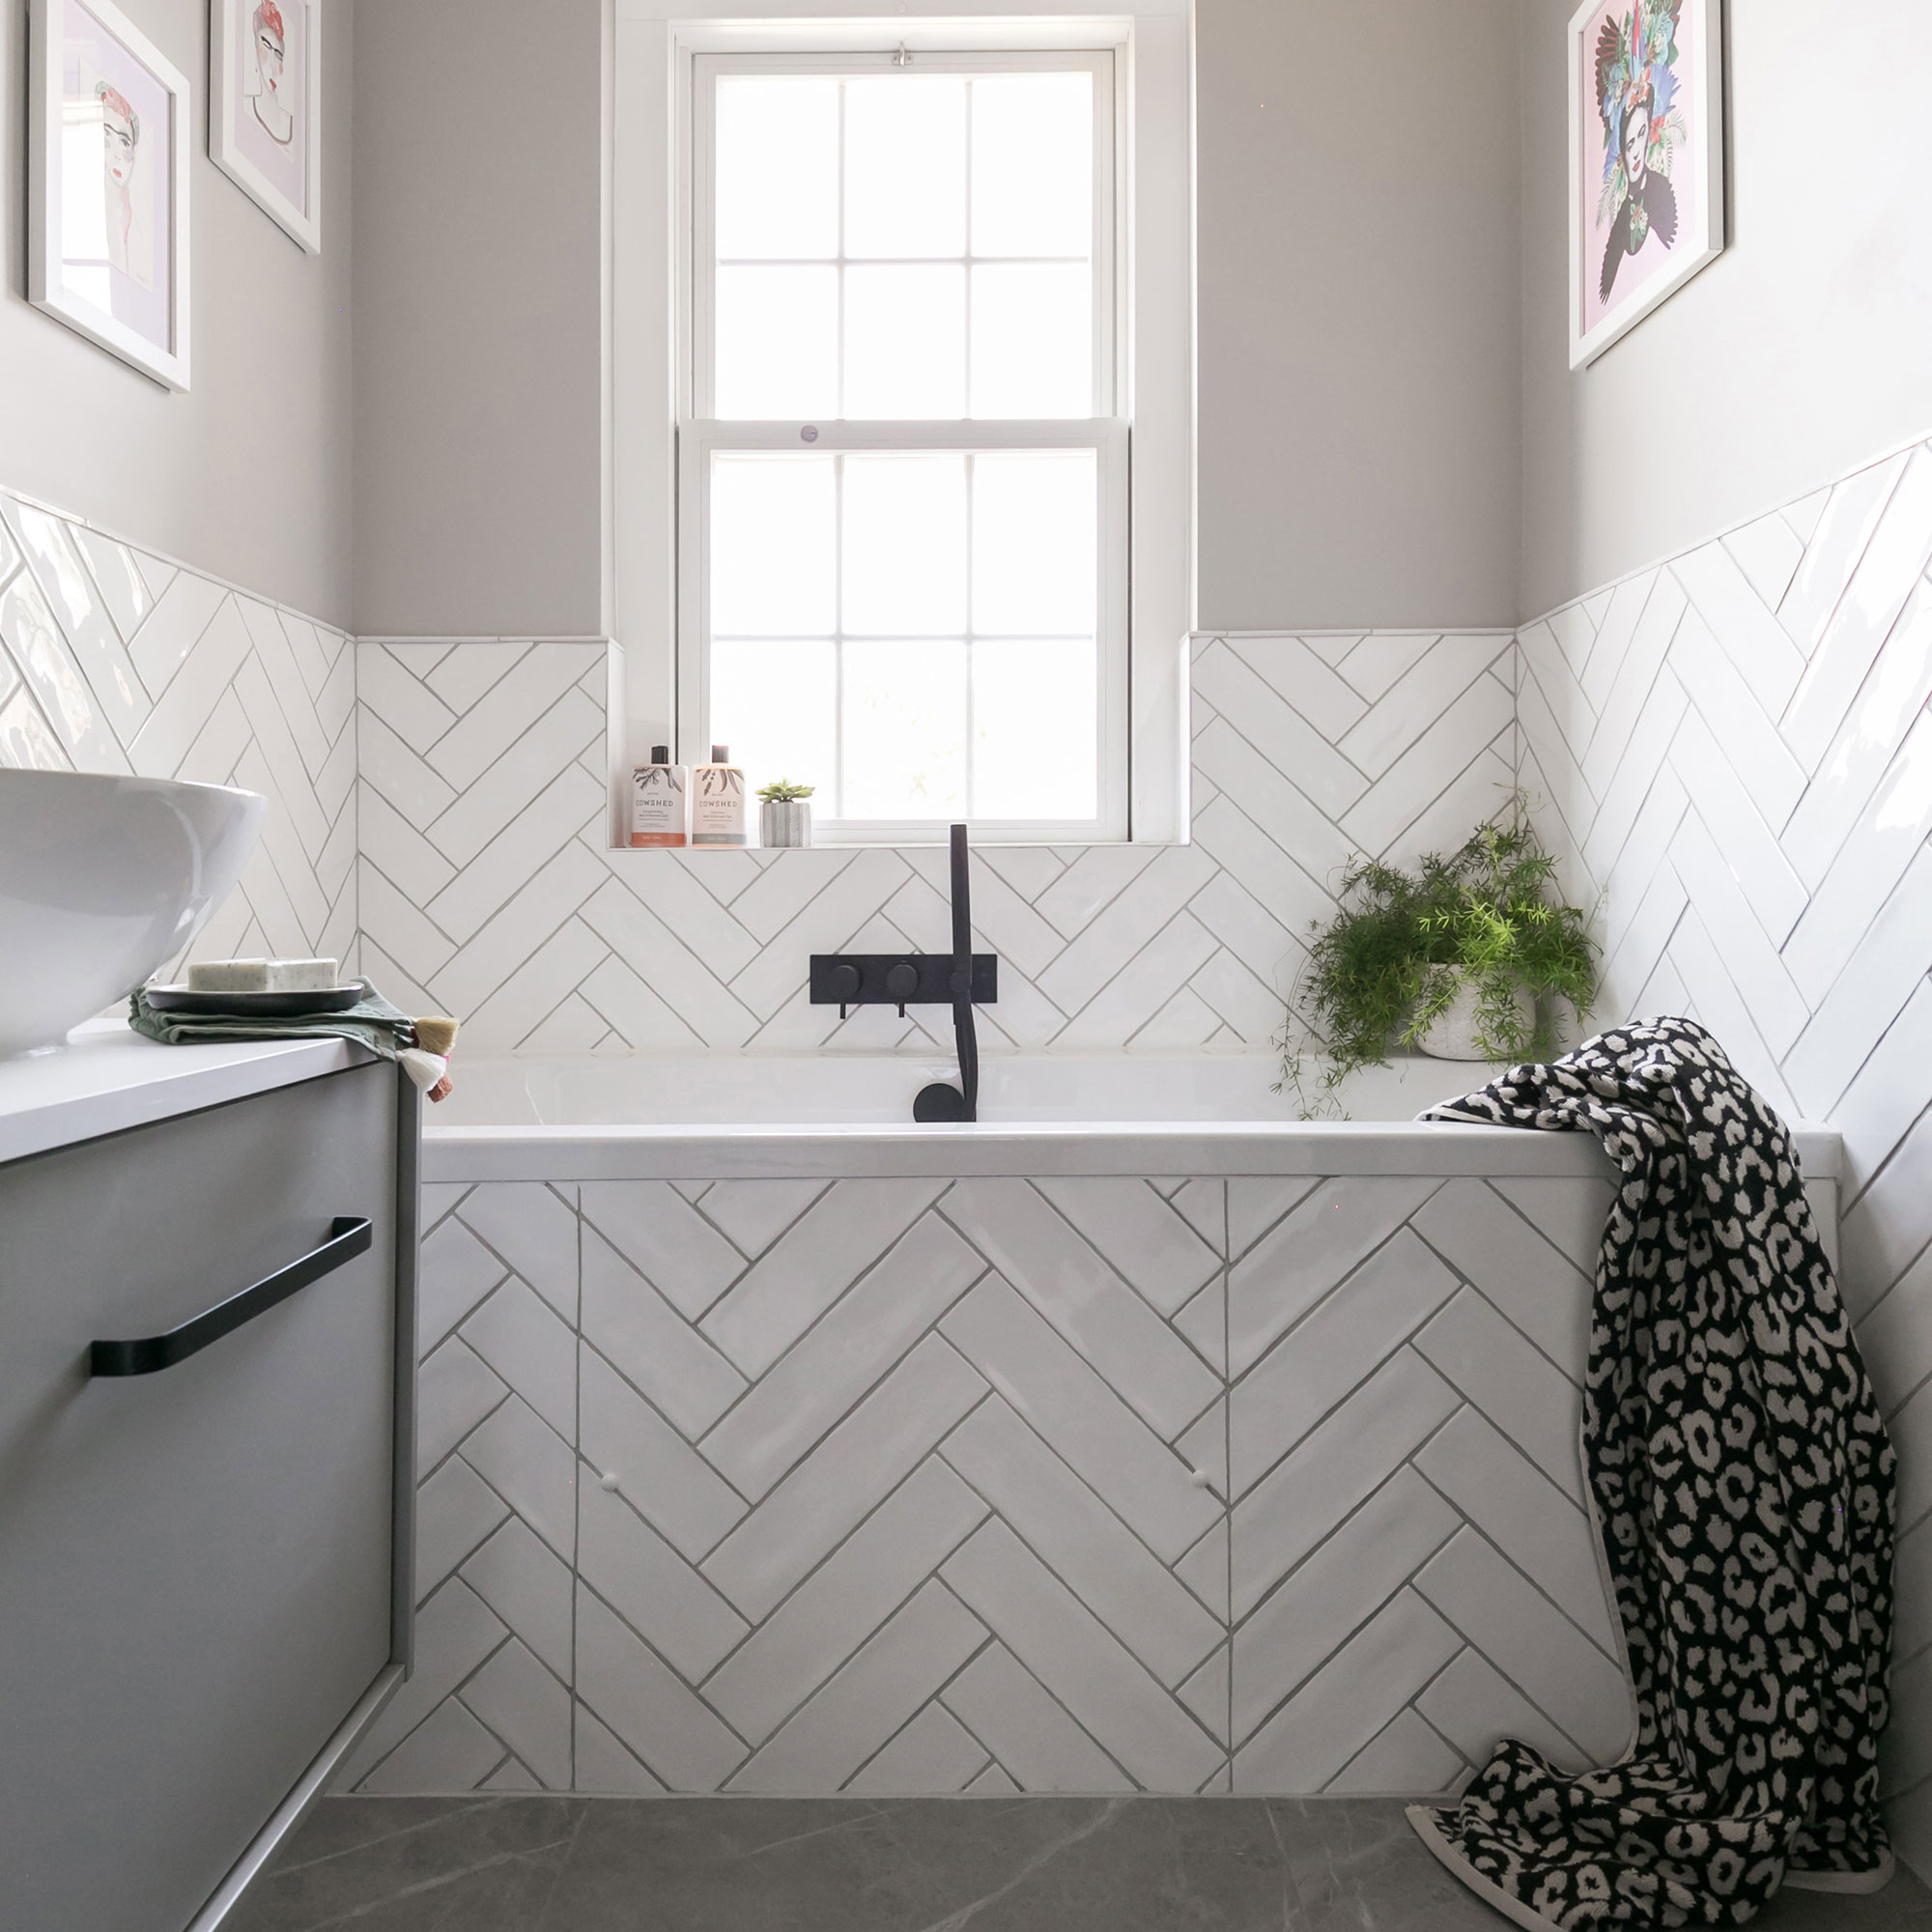 33 Small Bathroom Ideas To Make A Style Statement | Ideal Home